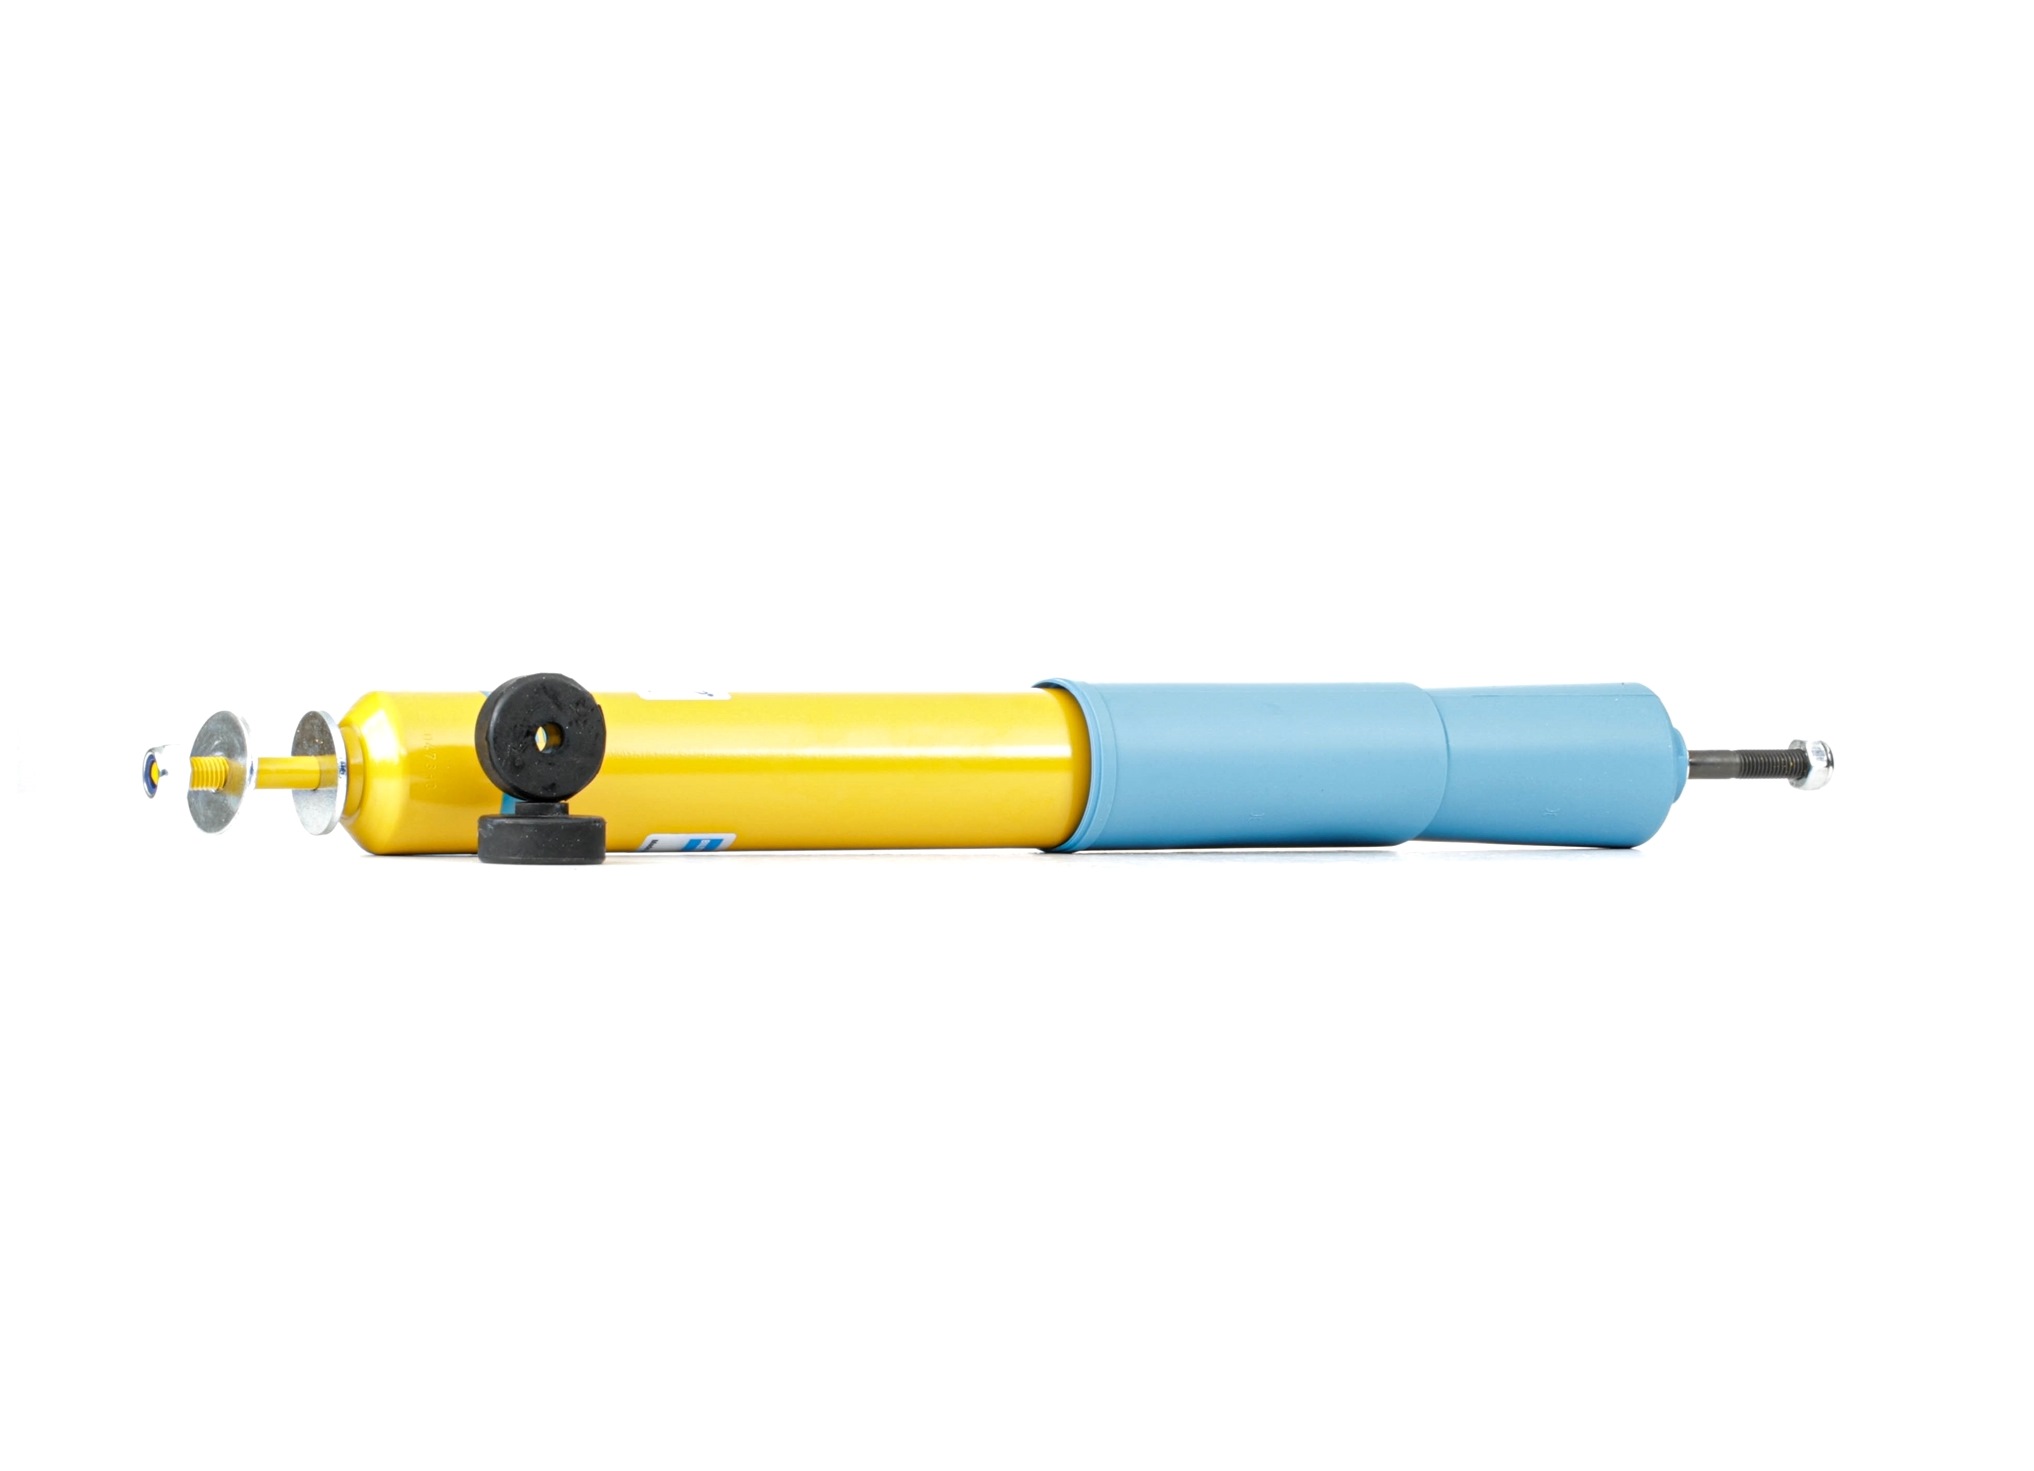 BILSTEIN Suspension dampers rear and front Giulia GT new 24-004732